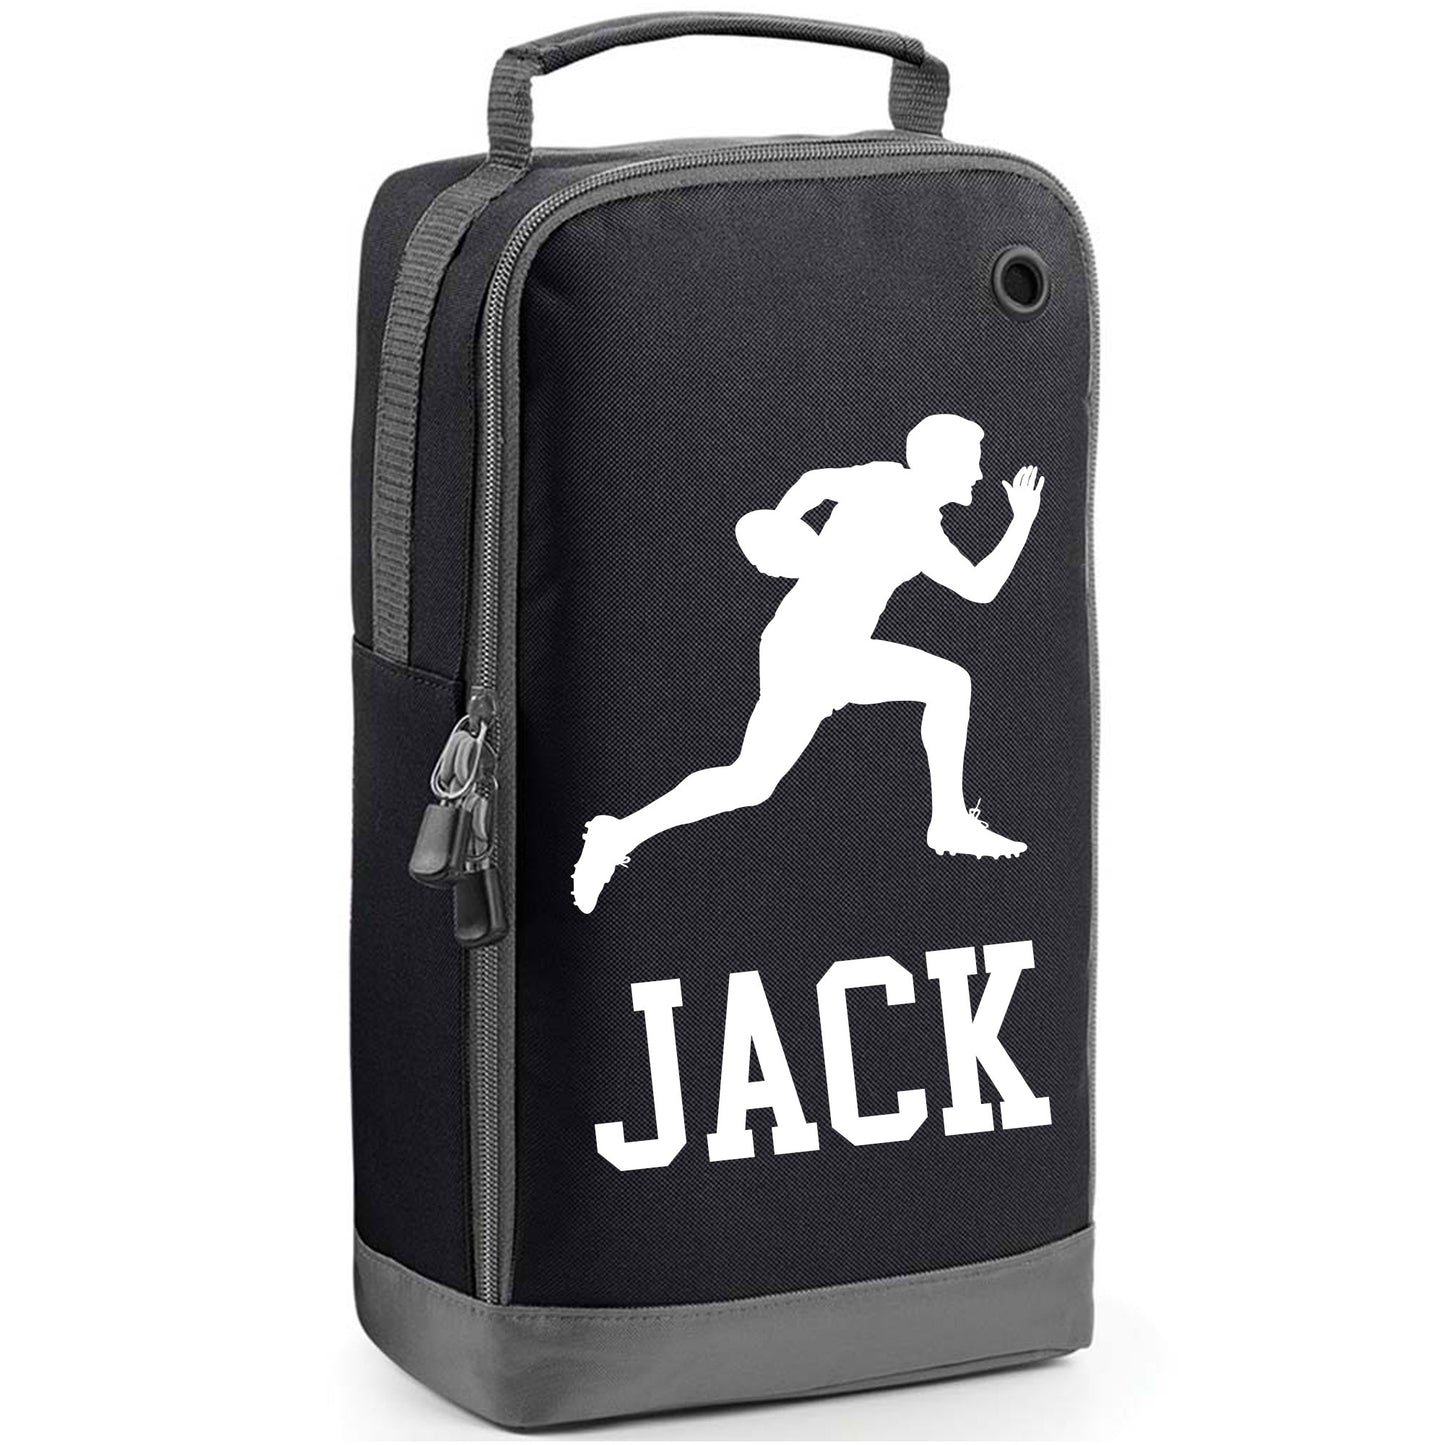 Personalised Rugby/ American Football Boot Bag with Design & Name  - Always Looking Good -   